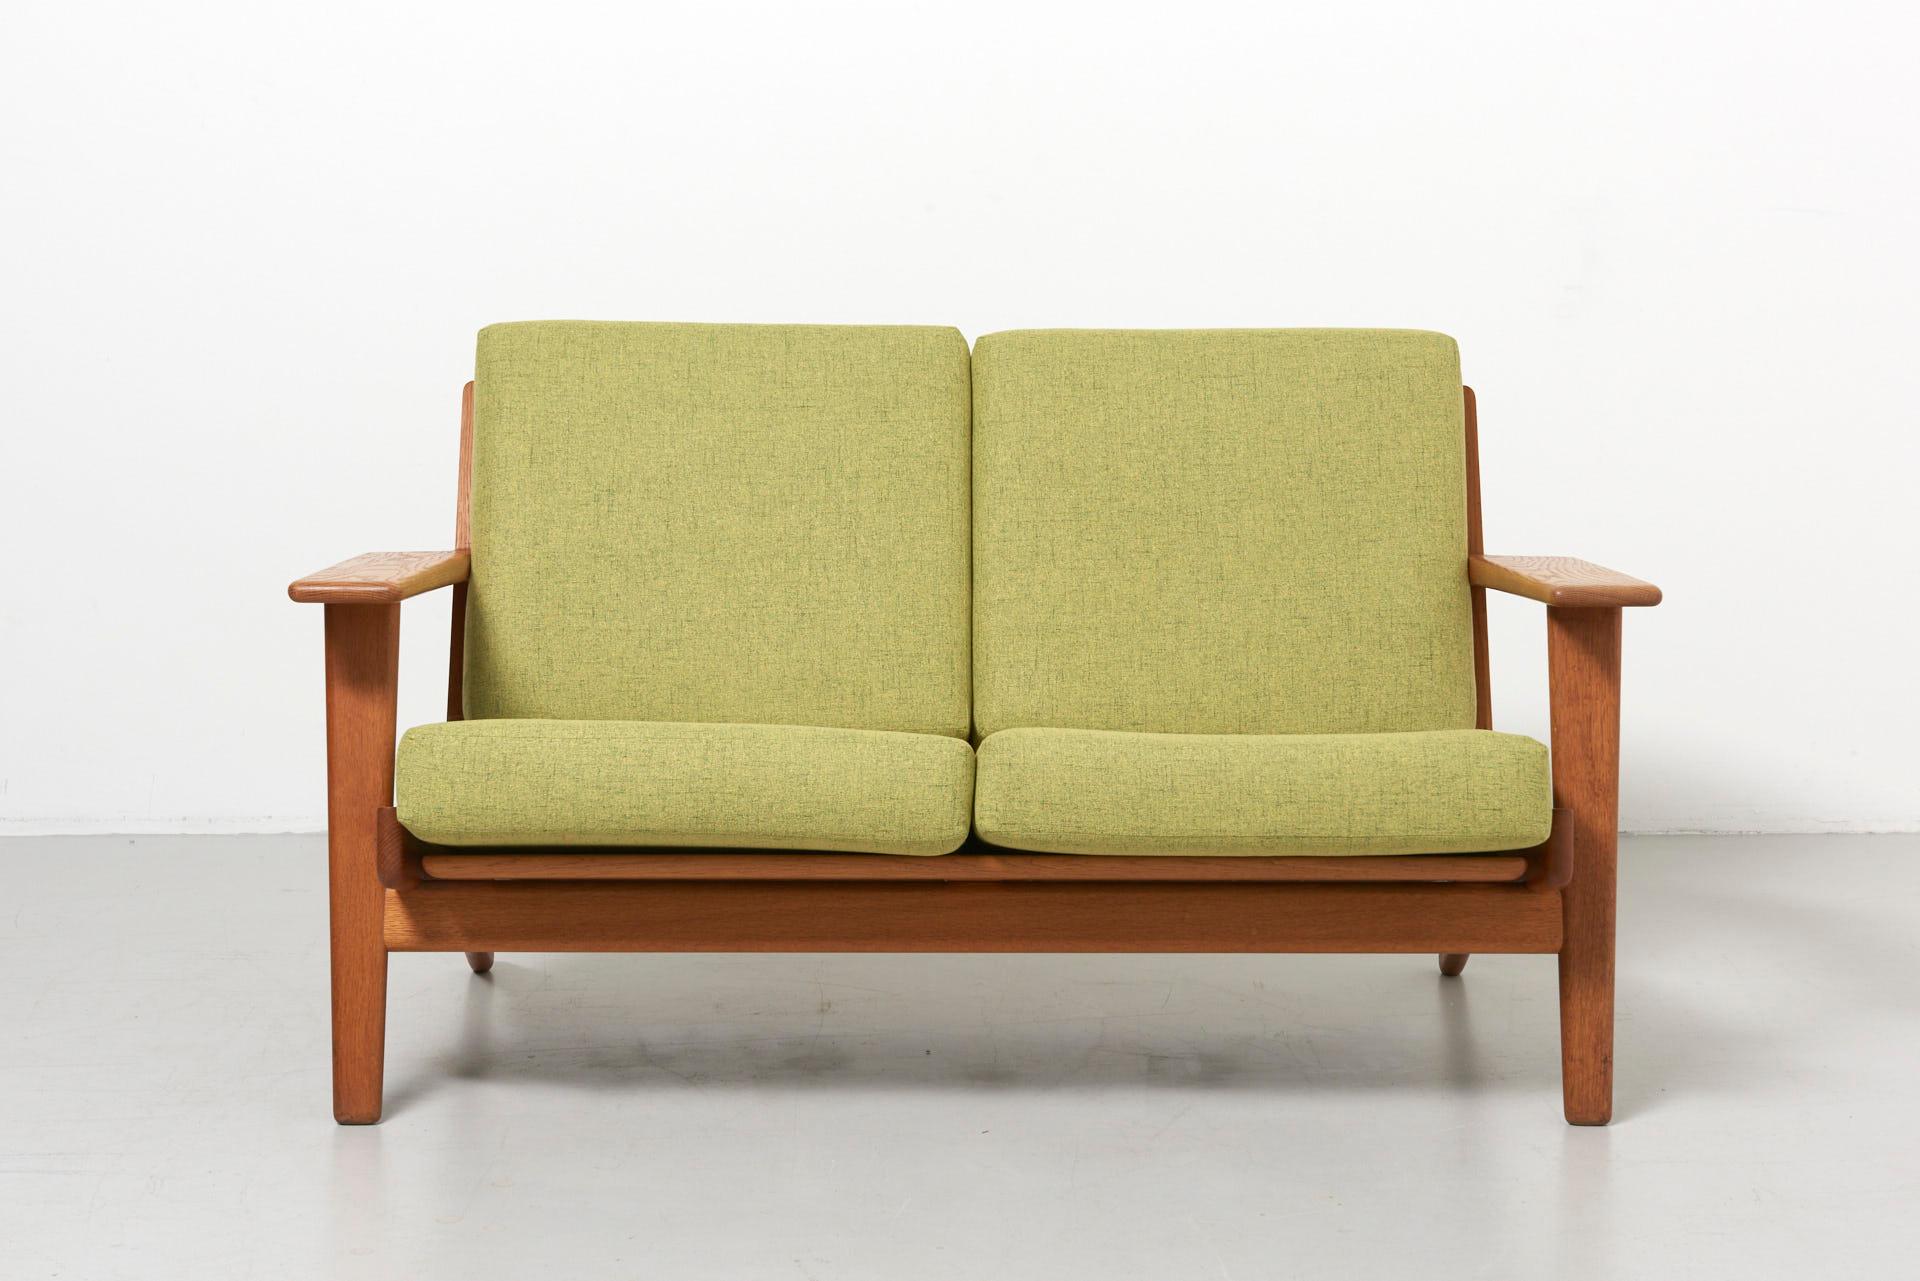 A rare 2-seat sofa designed by Hans J. Wegner in 1953. Model GE-290, produced by GETAMA in Denmark.
Solid oak frame with new cushions.